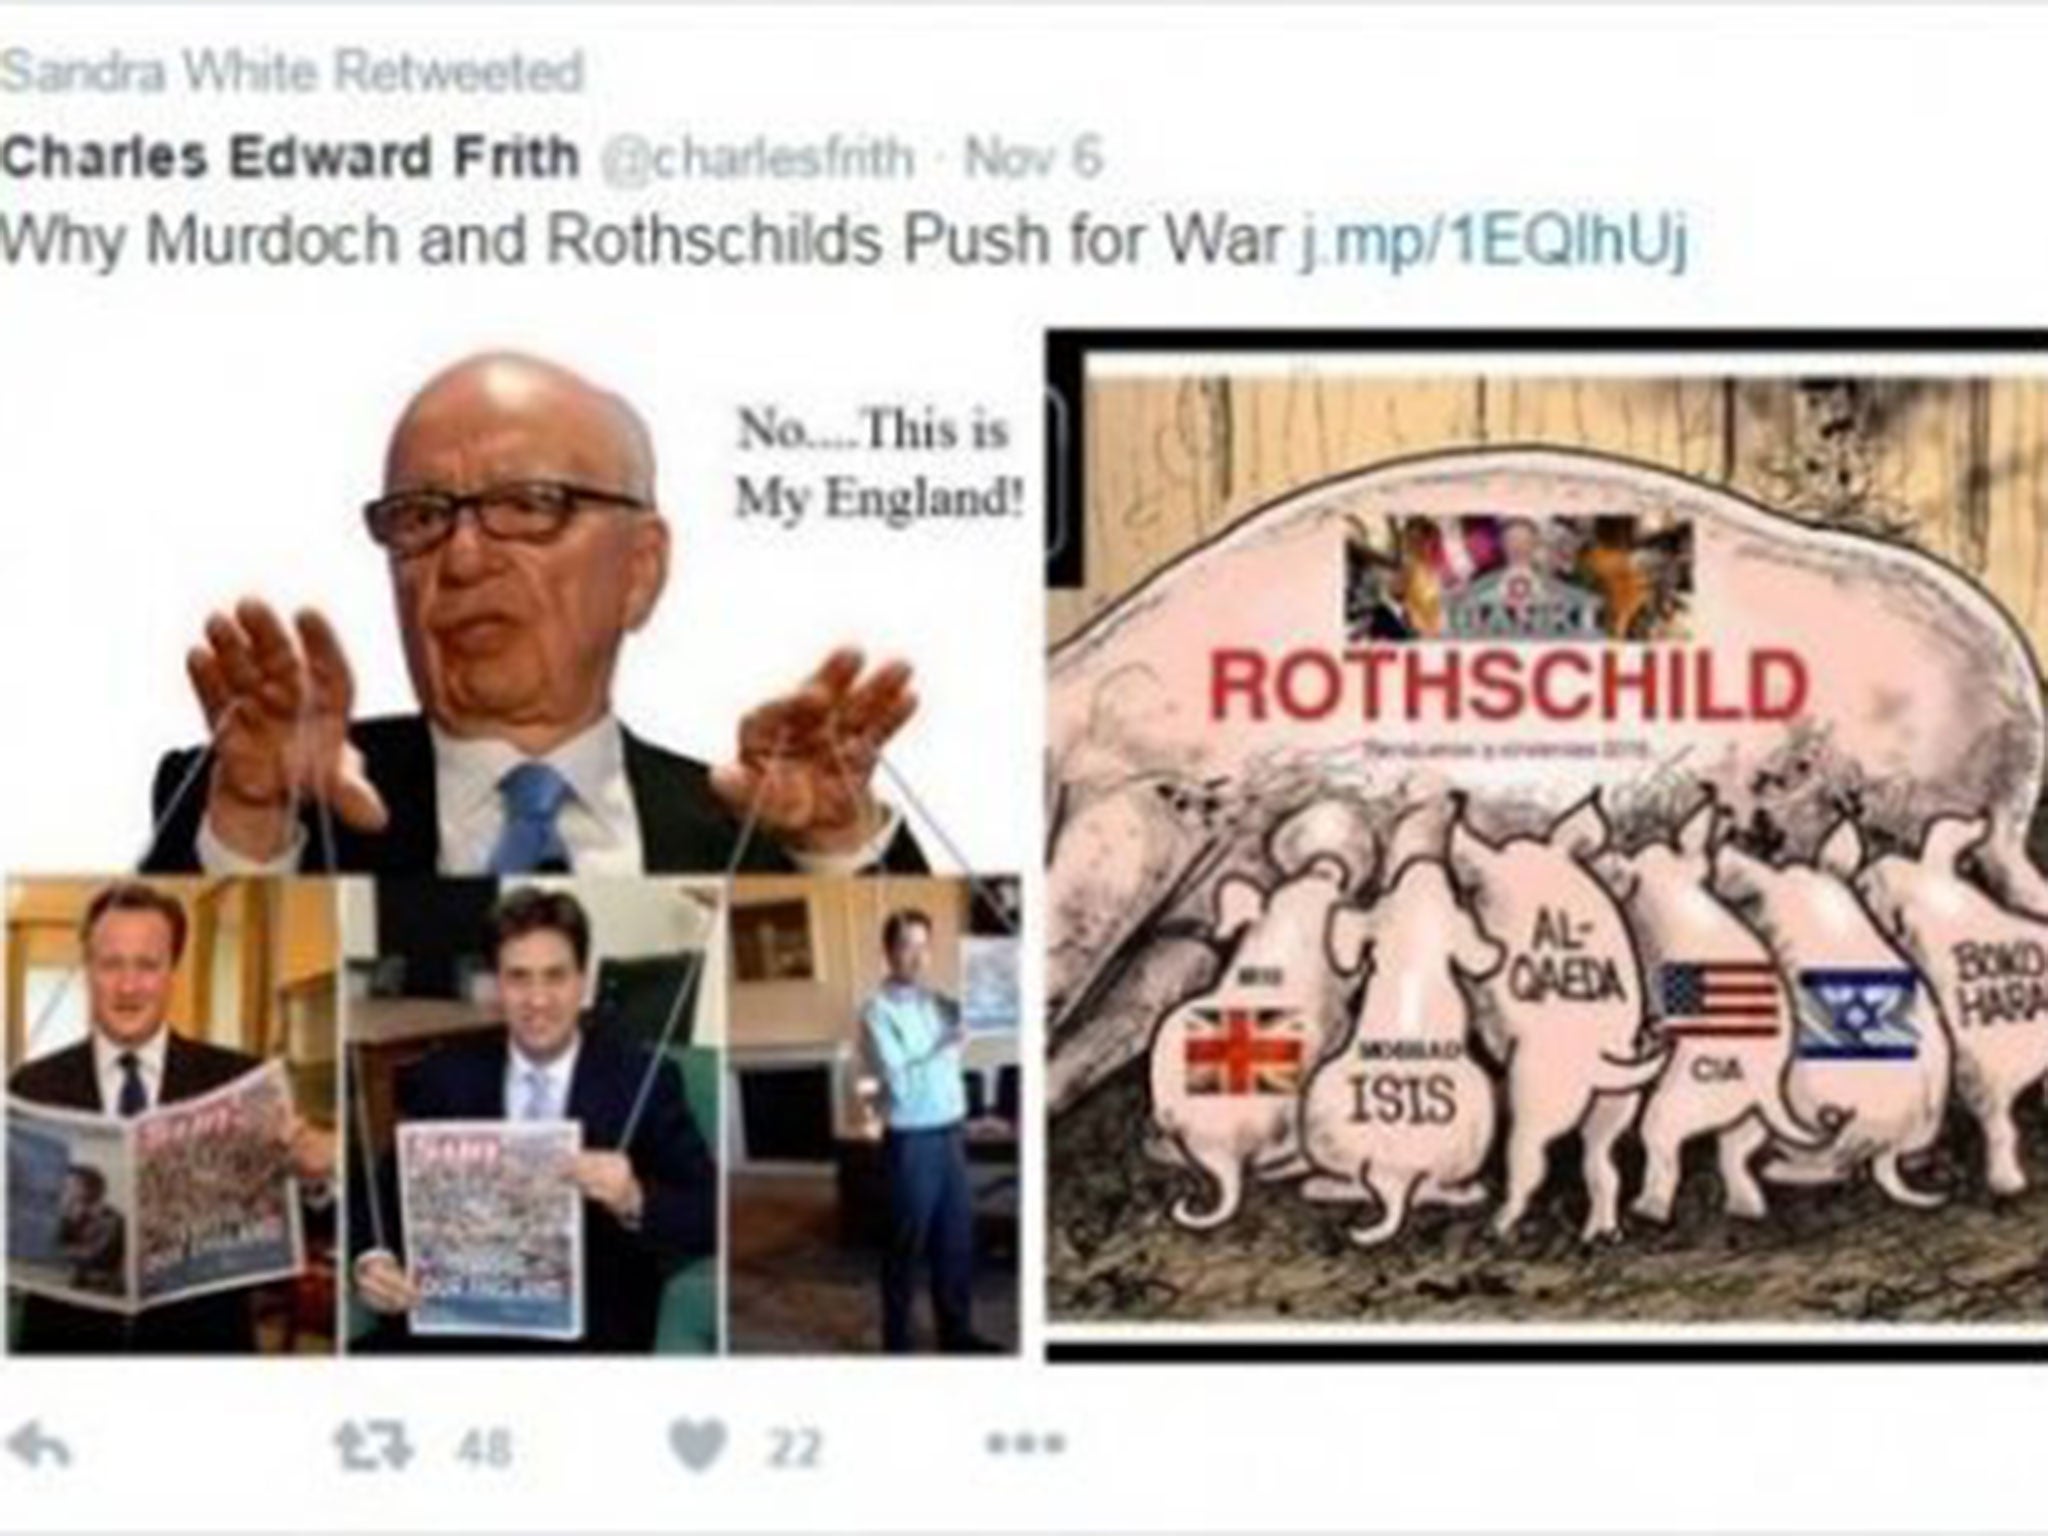 The cartoon shows six piglets, representing Britain, the US, Israel and terror groups Isis, Al Qaeda and Boko Haram, suckling from a large sow with the word "Rothschild" and an image of a bank with the Star of David on it